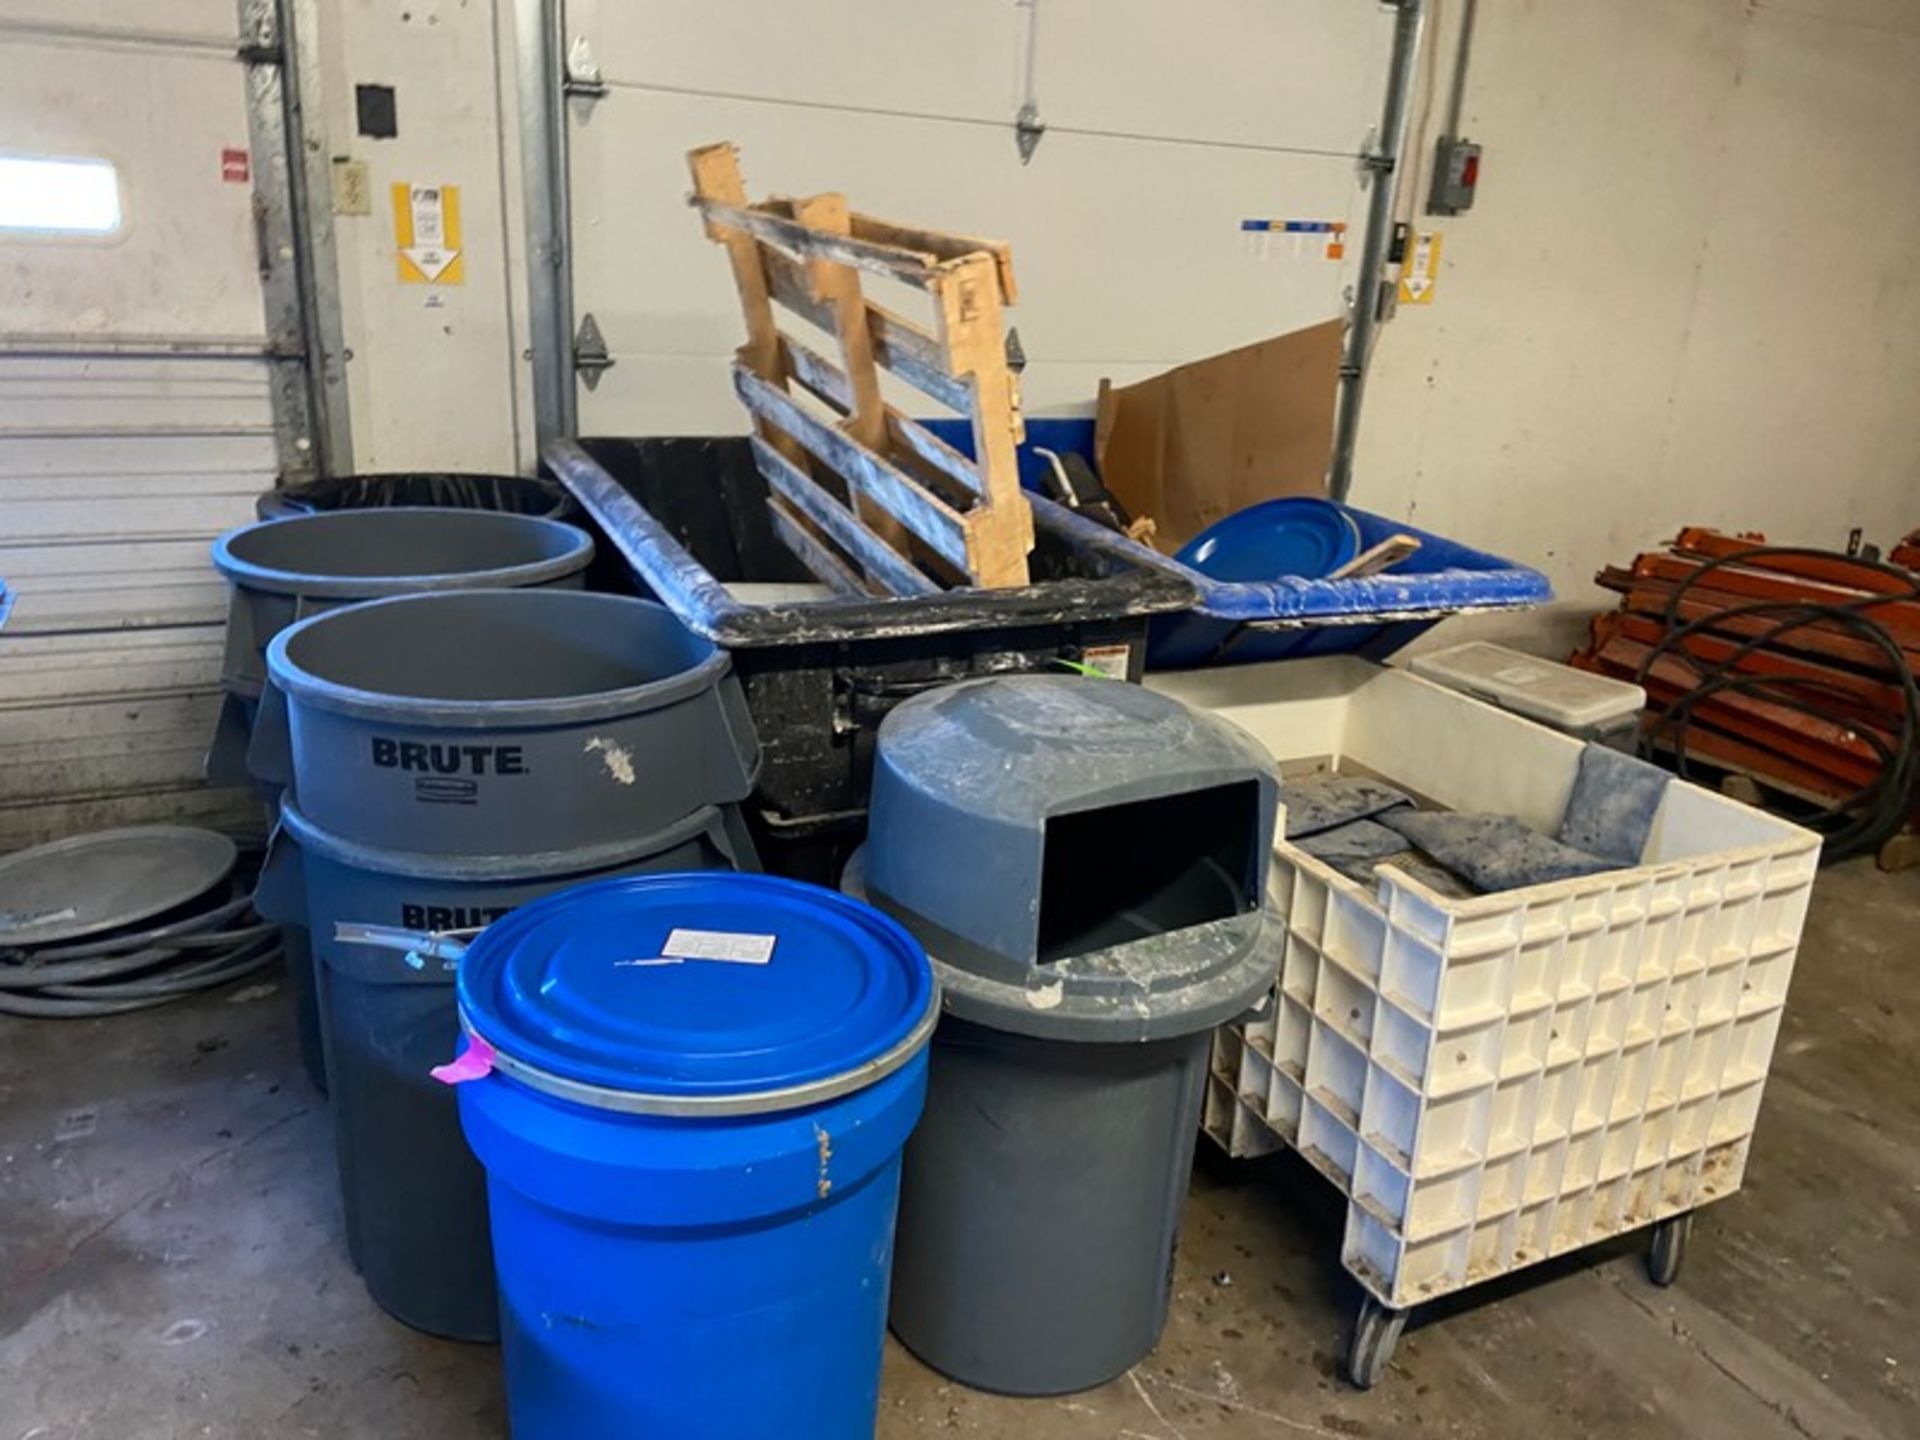 LOT OF ASSORTED PLASTIC TRASH DUMPSTERS, TRASH CANS, & PLASTIC BIN (LOCATED IN CALLERY, PA)